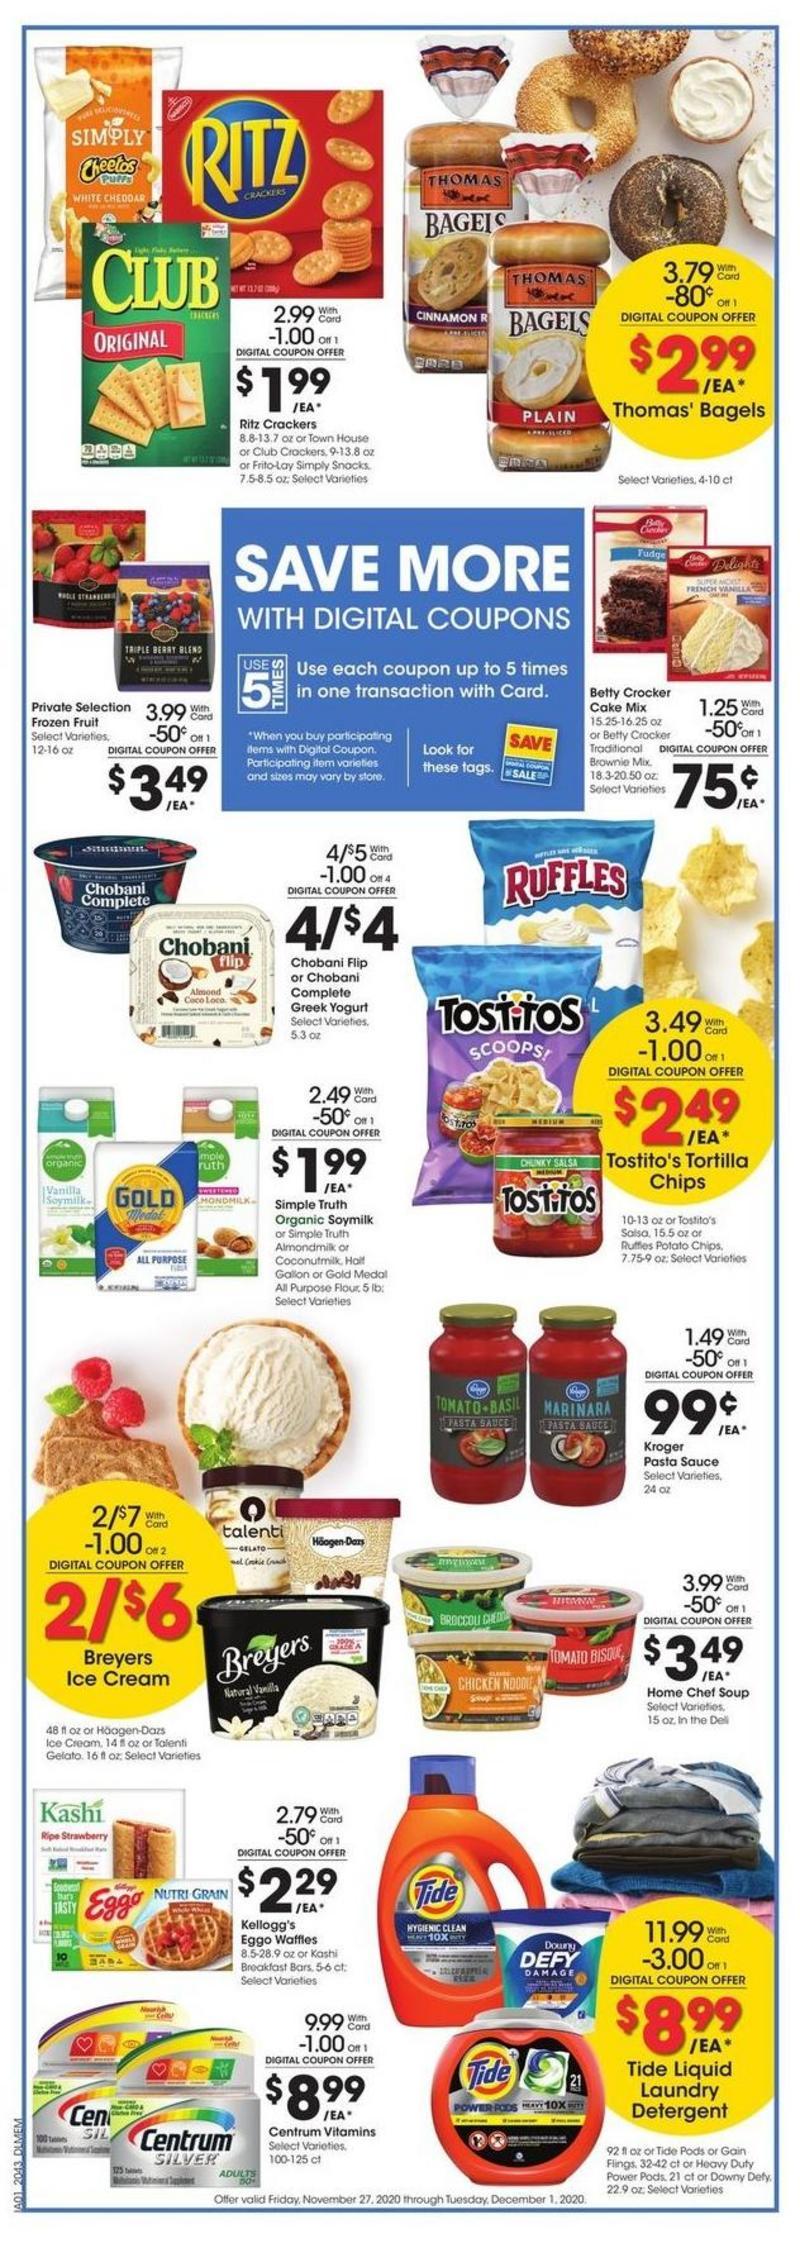 Kroger Weekly Ad from November 27